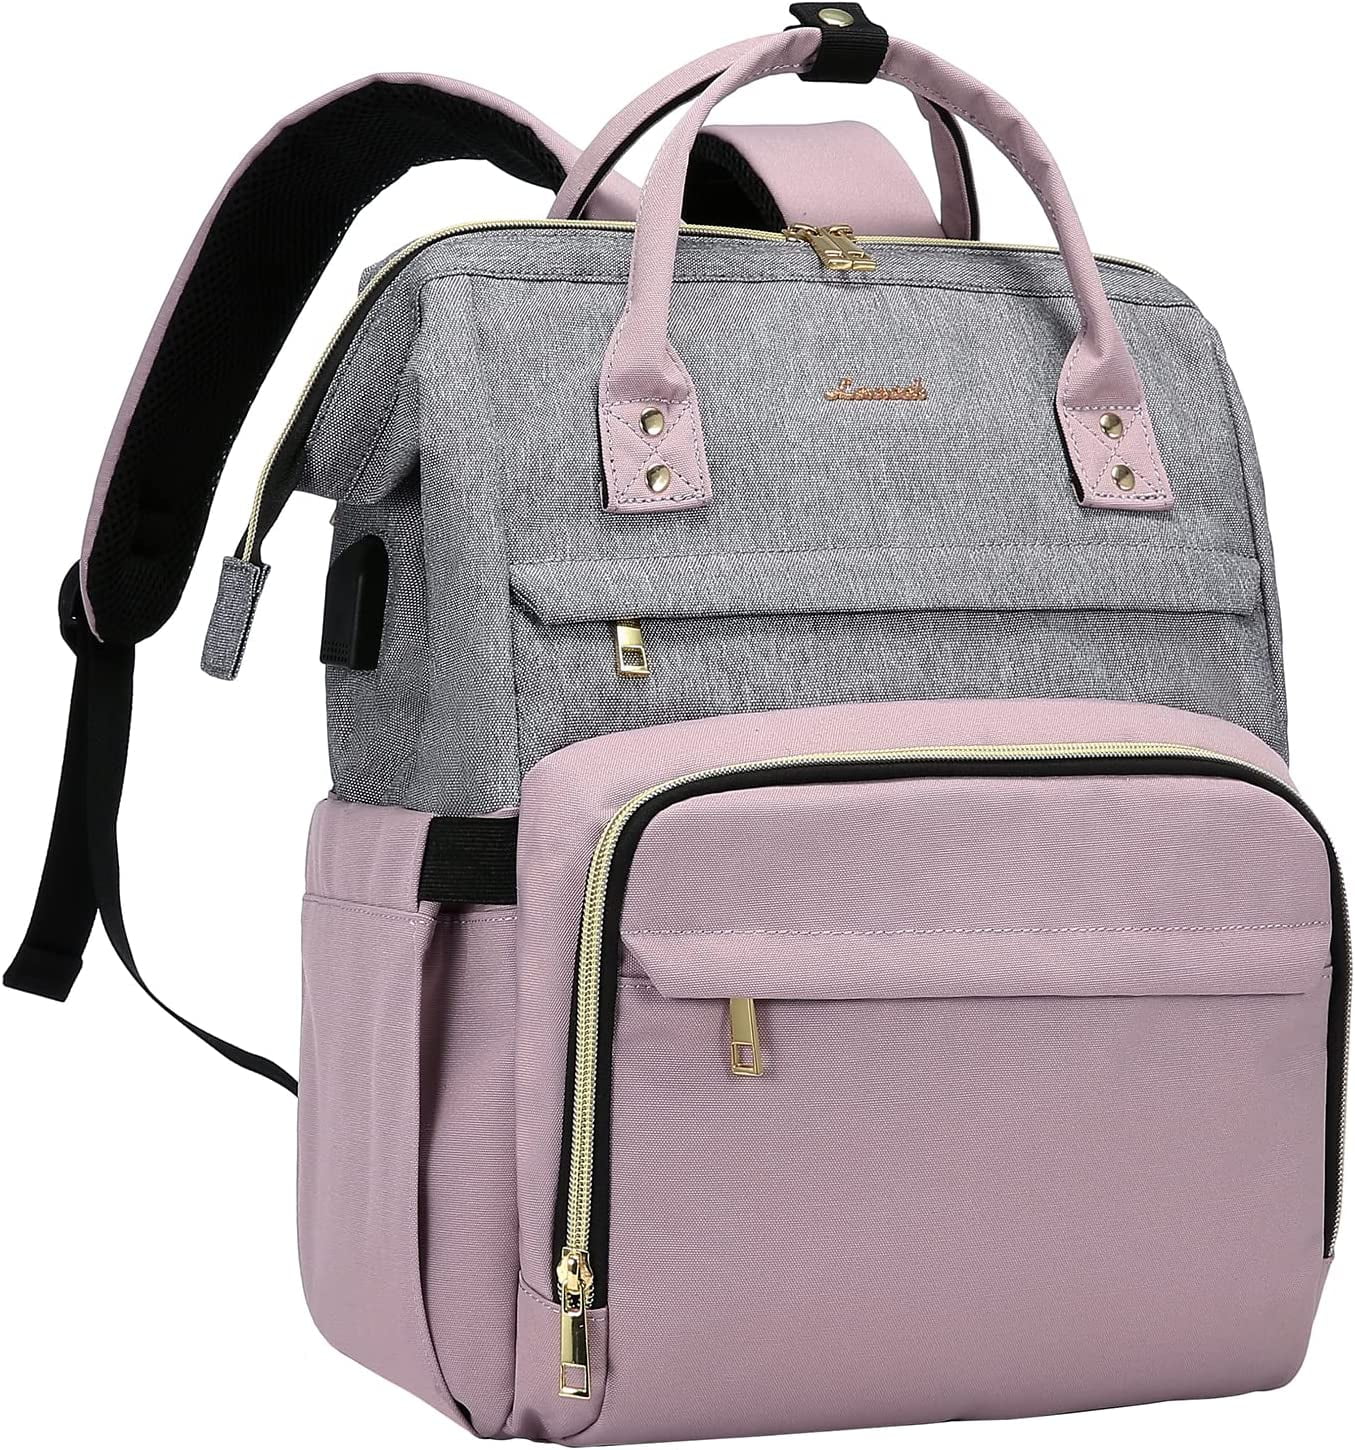 Lovevook Laptop Backpack for Women,17